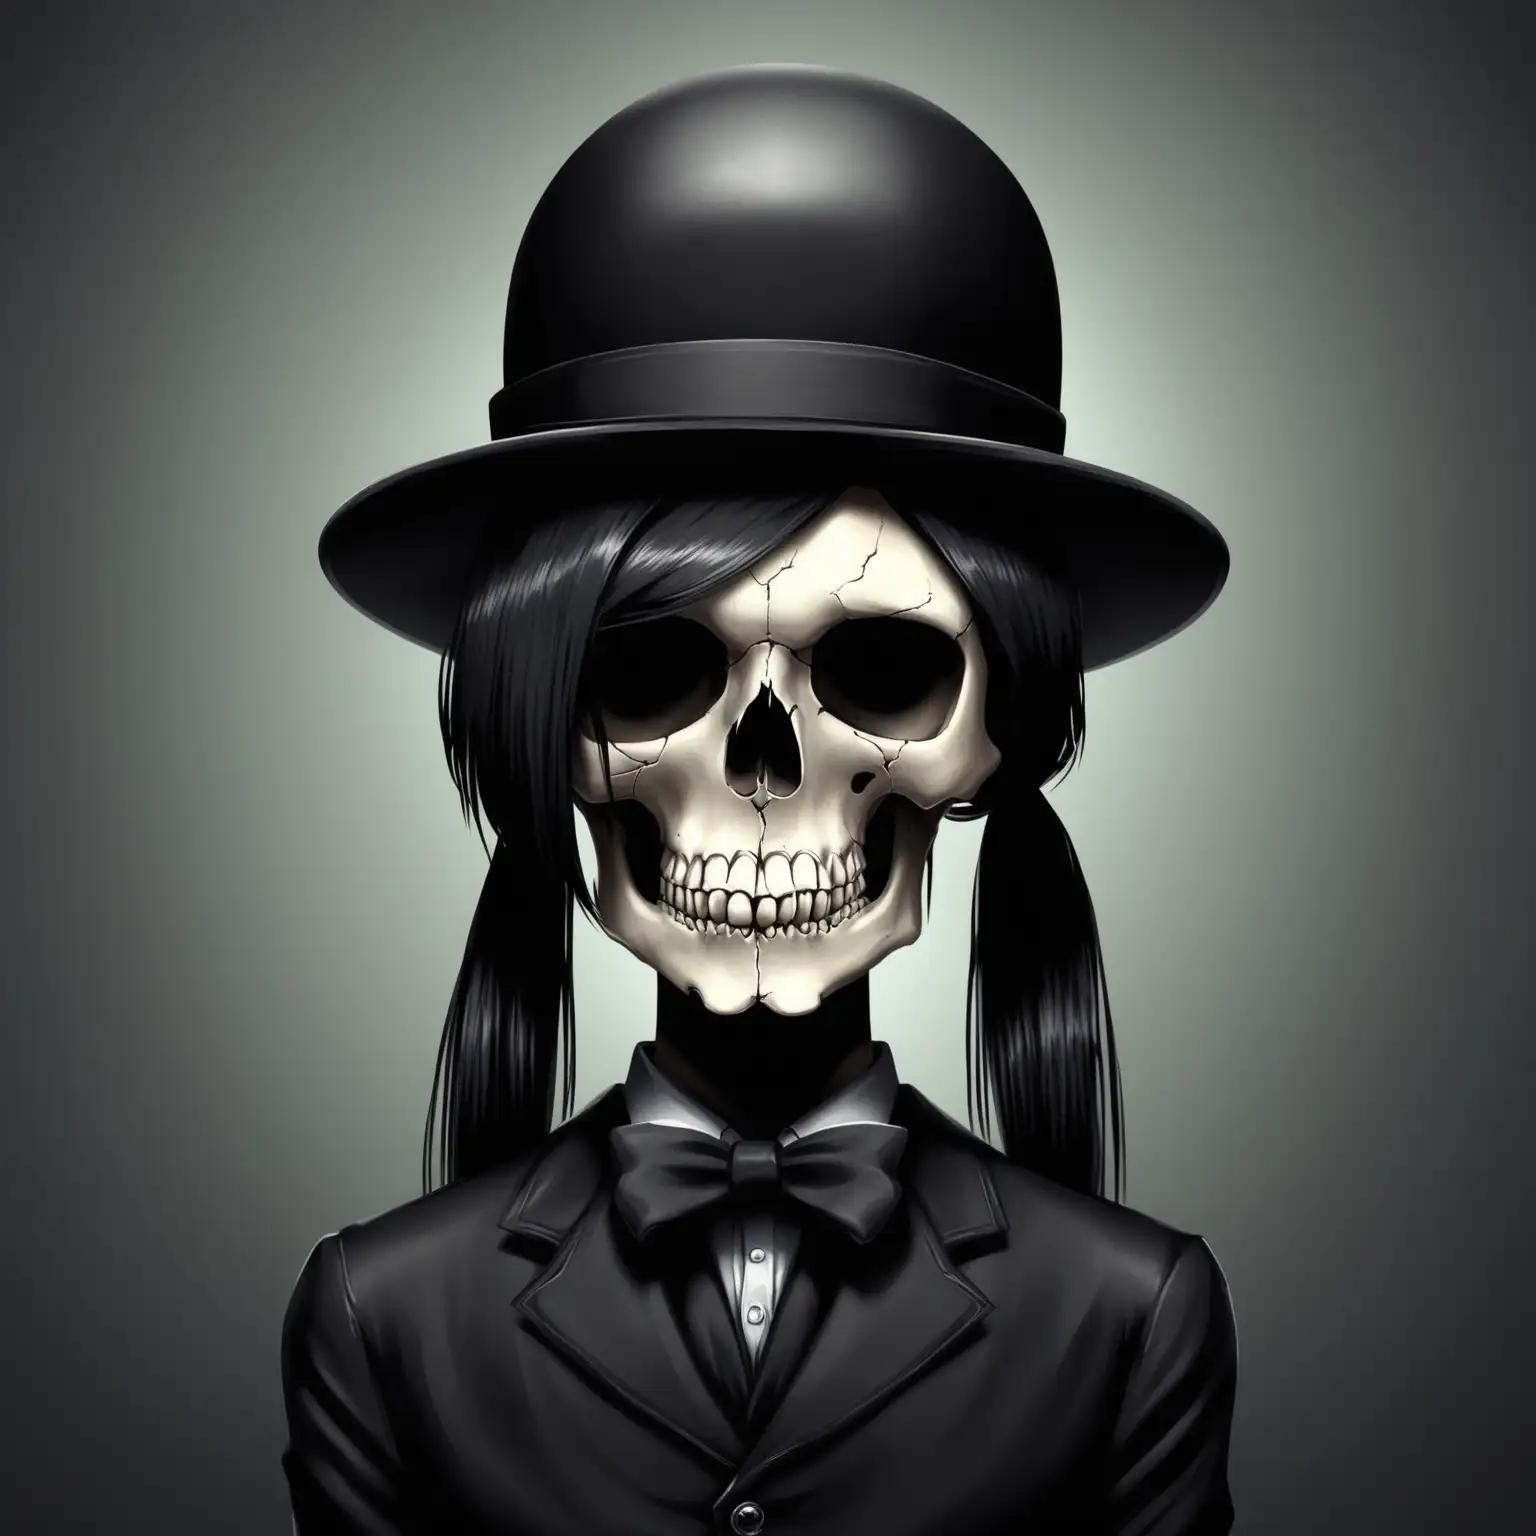 skull head with black hair in pony tails with black bowler hat